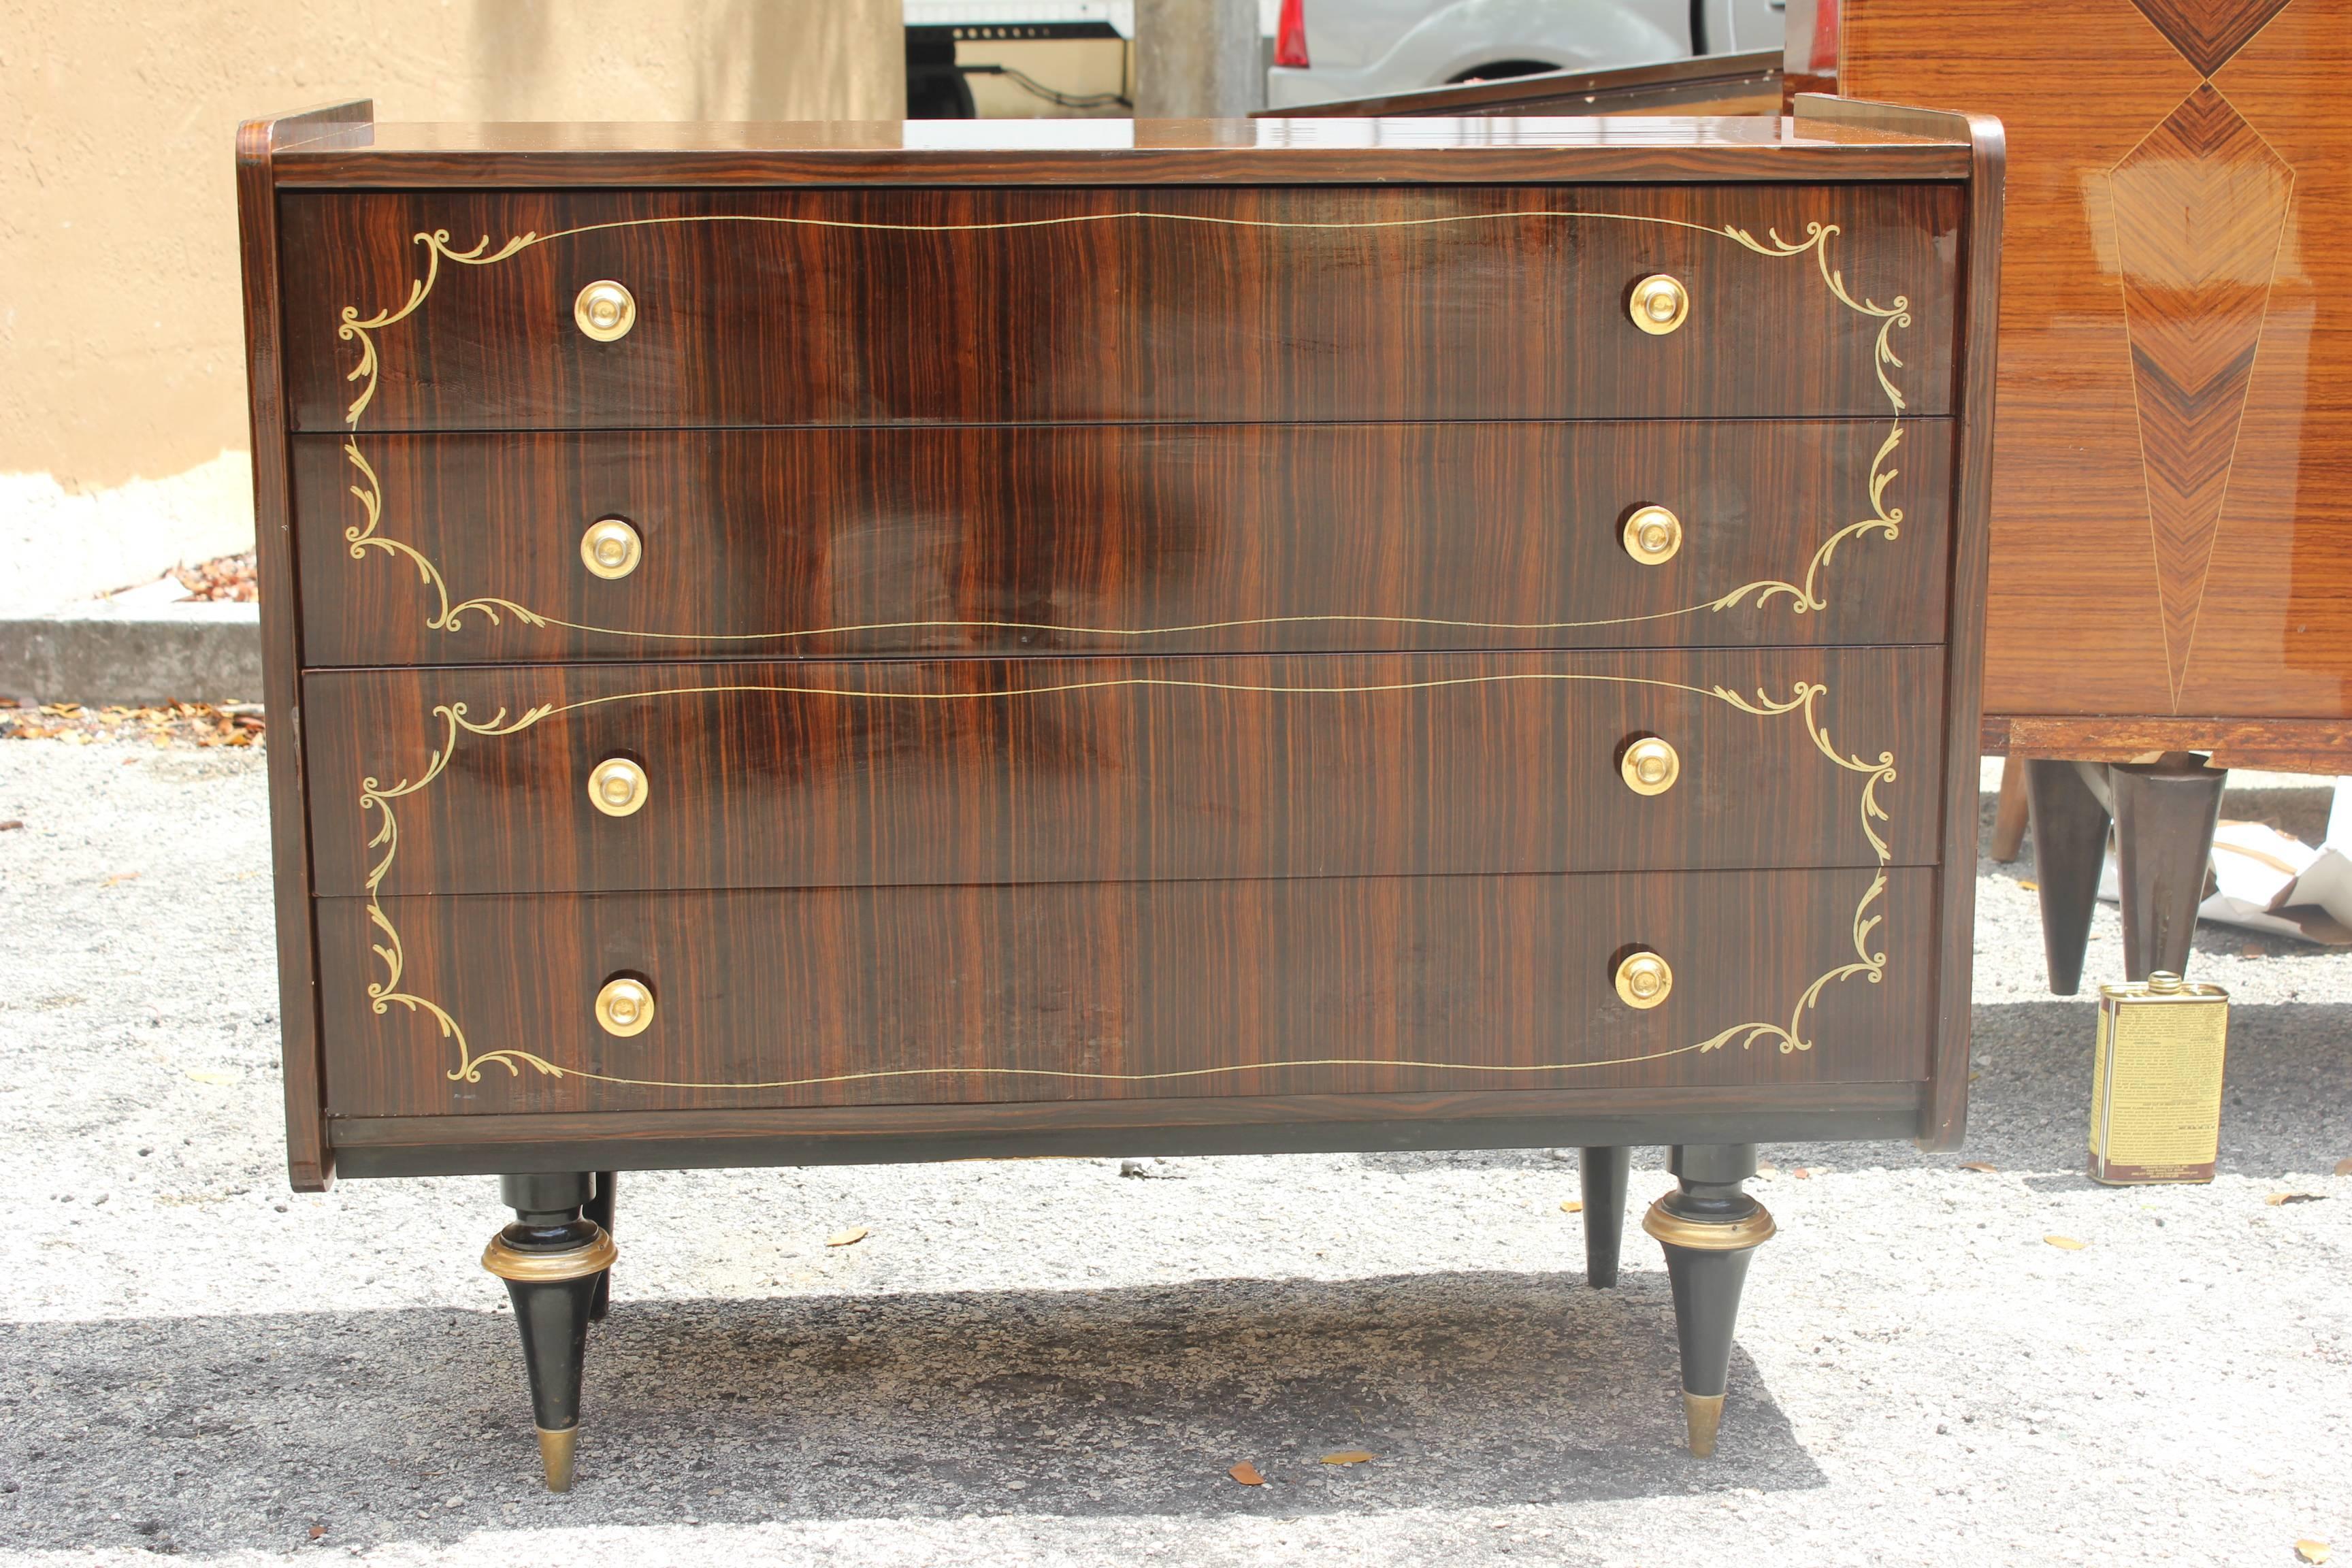 A stunning French Art Deco exotic Macassar ebony four-drawer dresser, circa 1940s. Beautiful inlay and detail. Excellent condition.